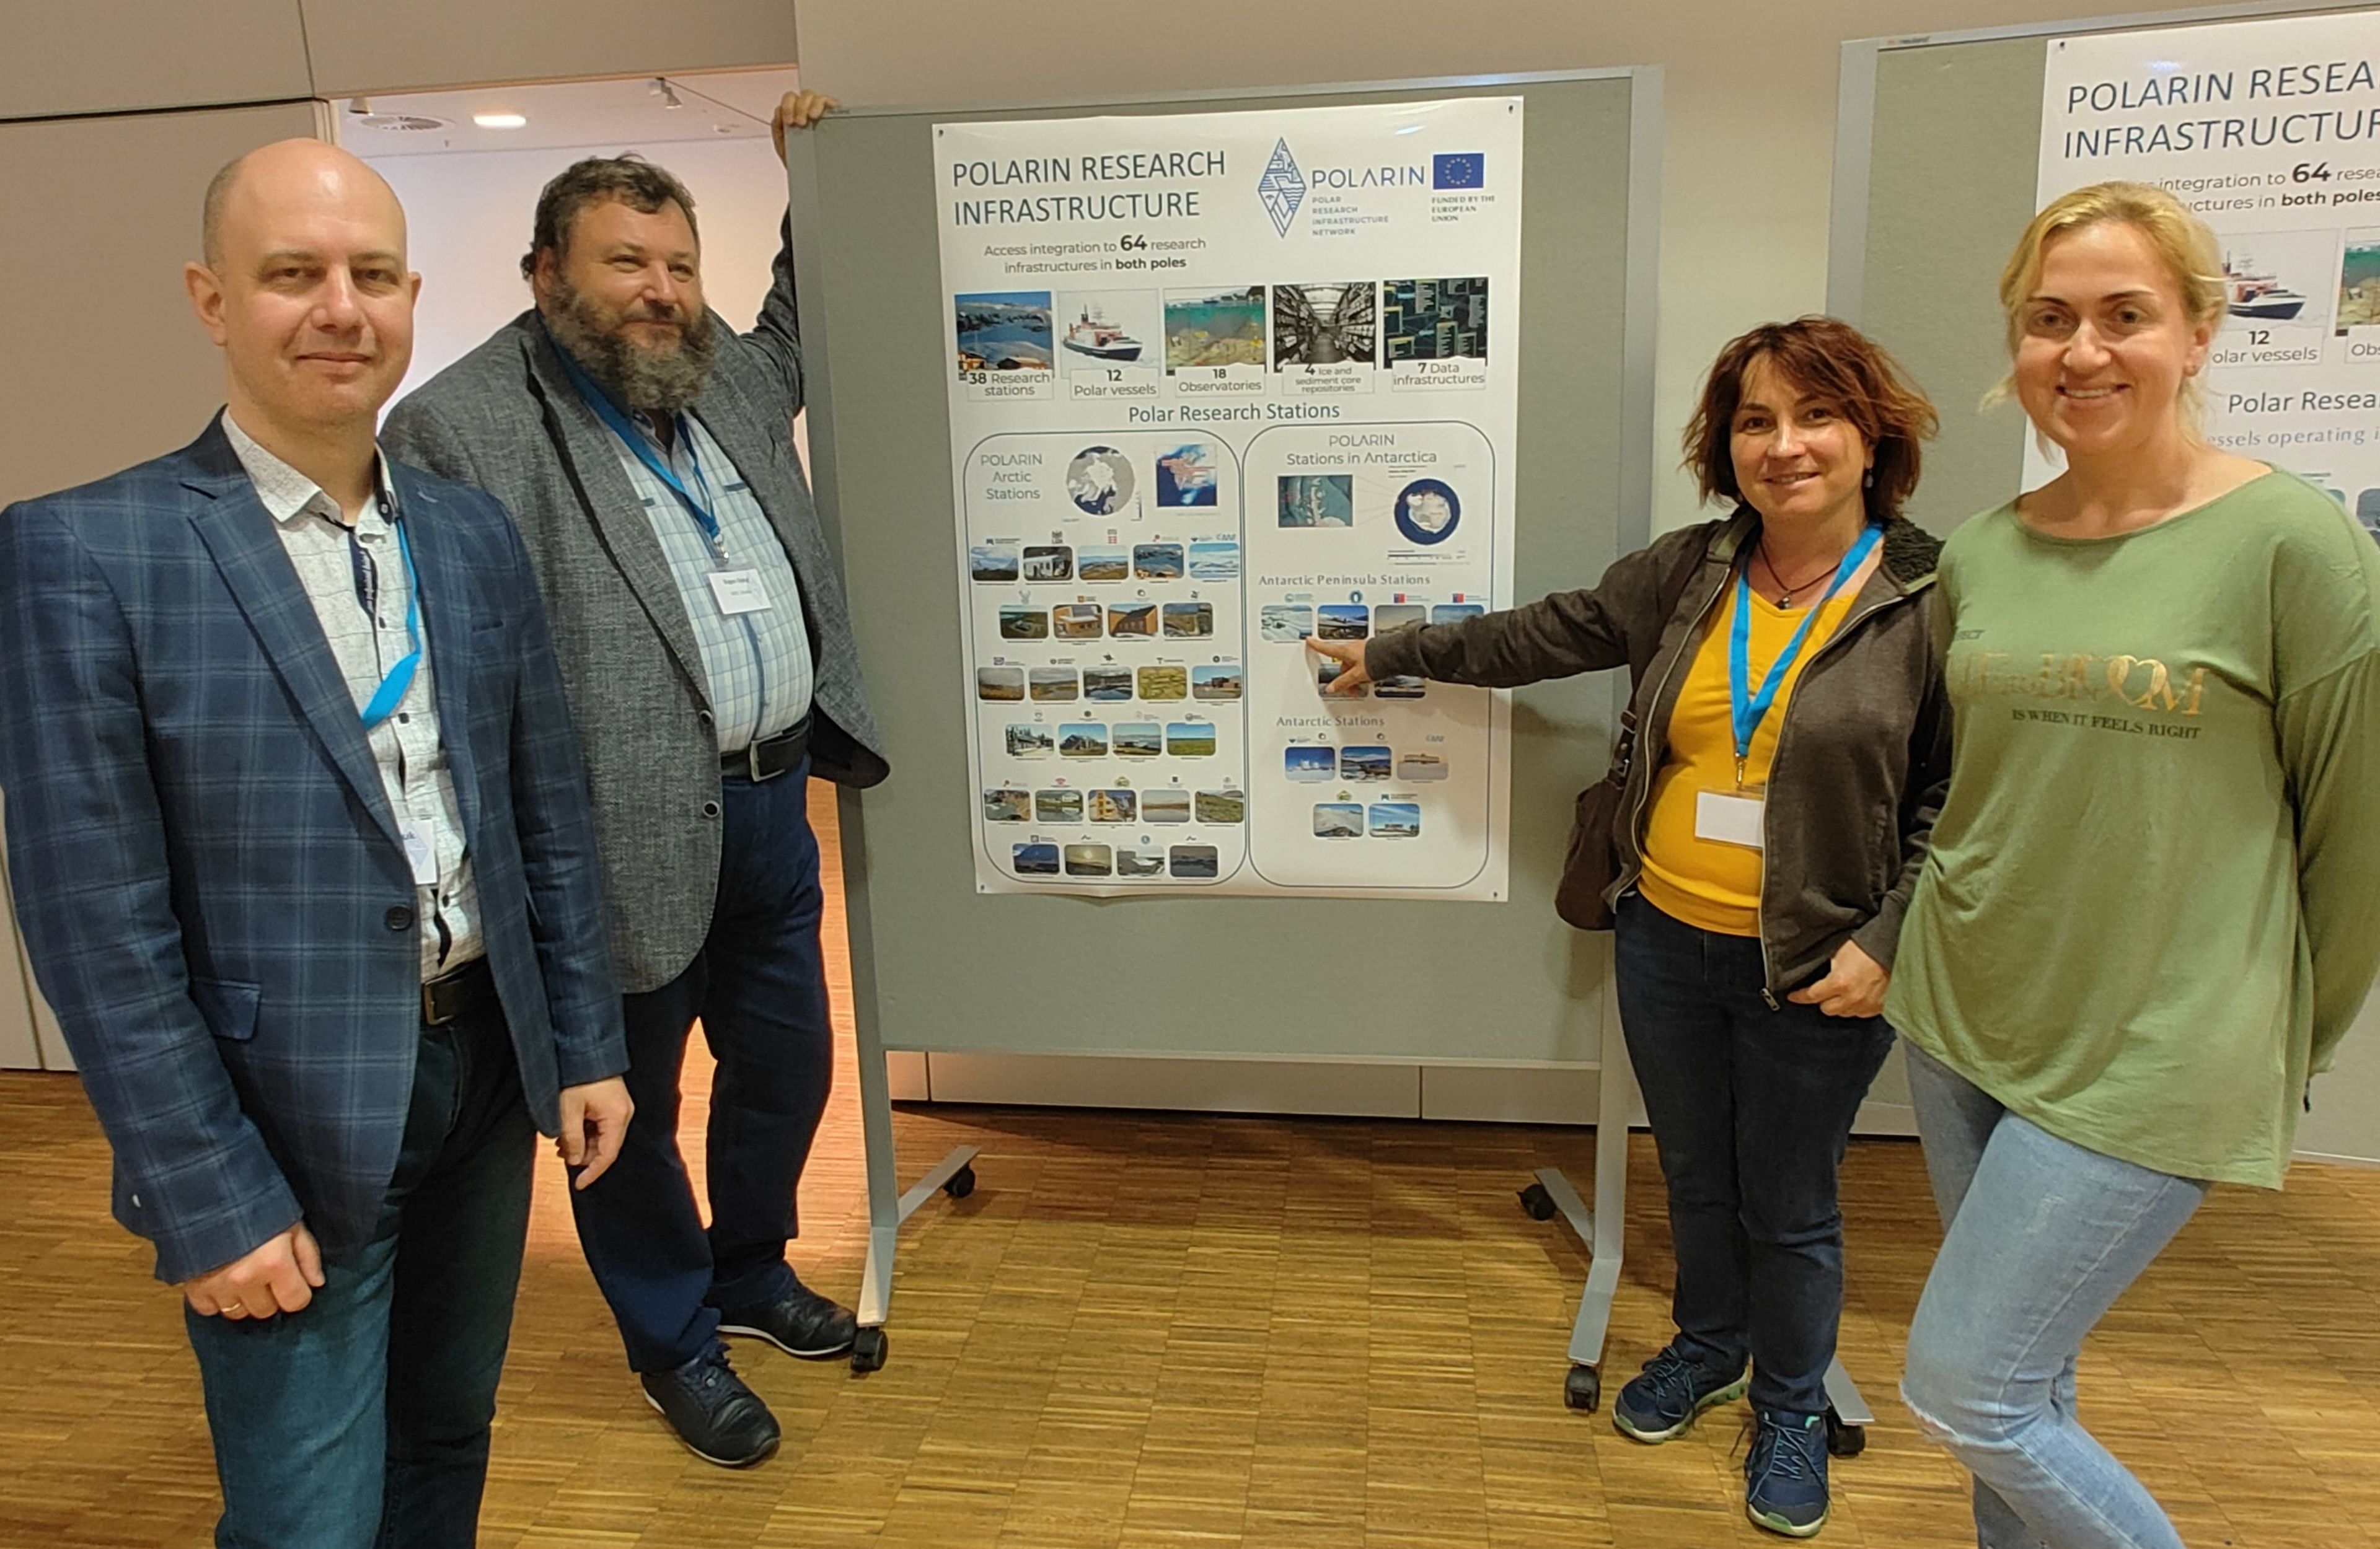 Ukrainian scientists will be able to participate in competitions to use the infrastructure of other countries in the Arctic and Antarctica - the first meeting of the POLARIN project